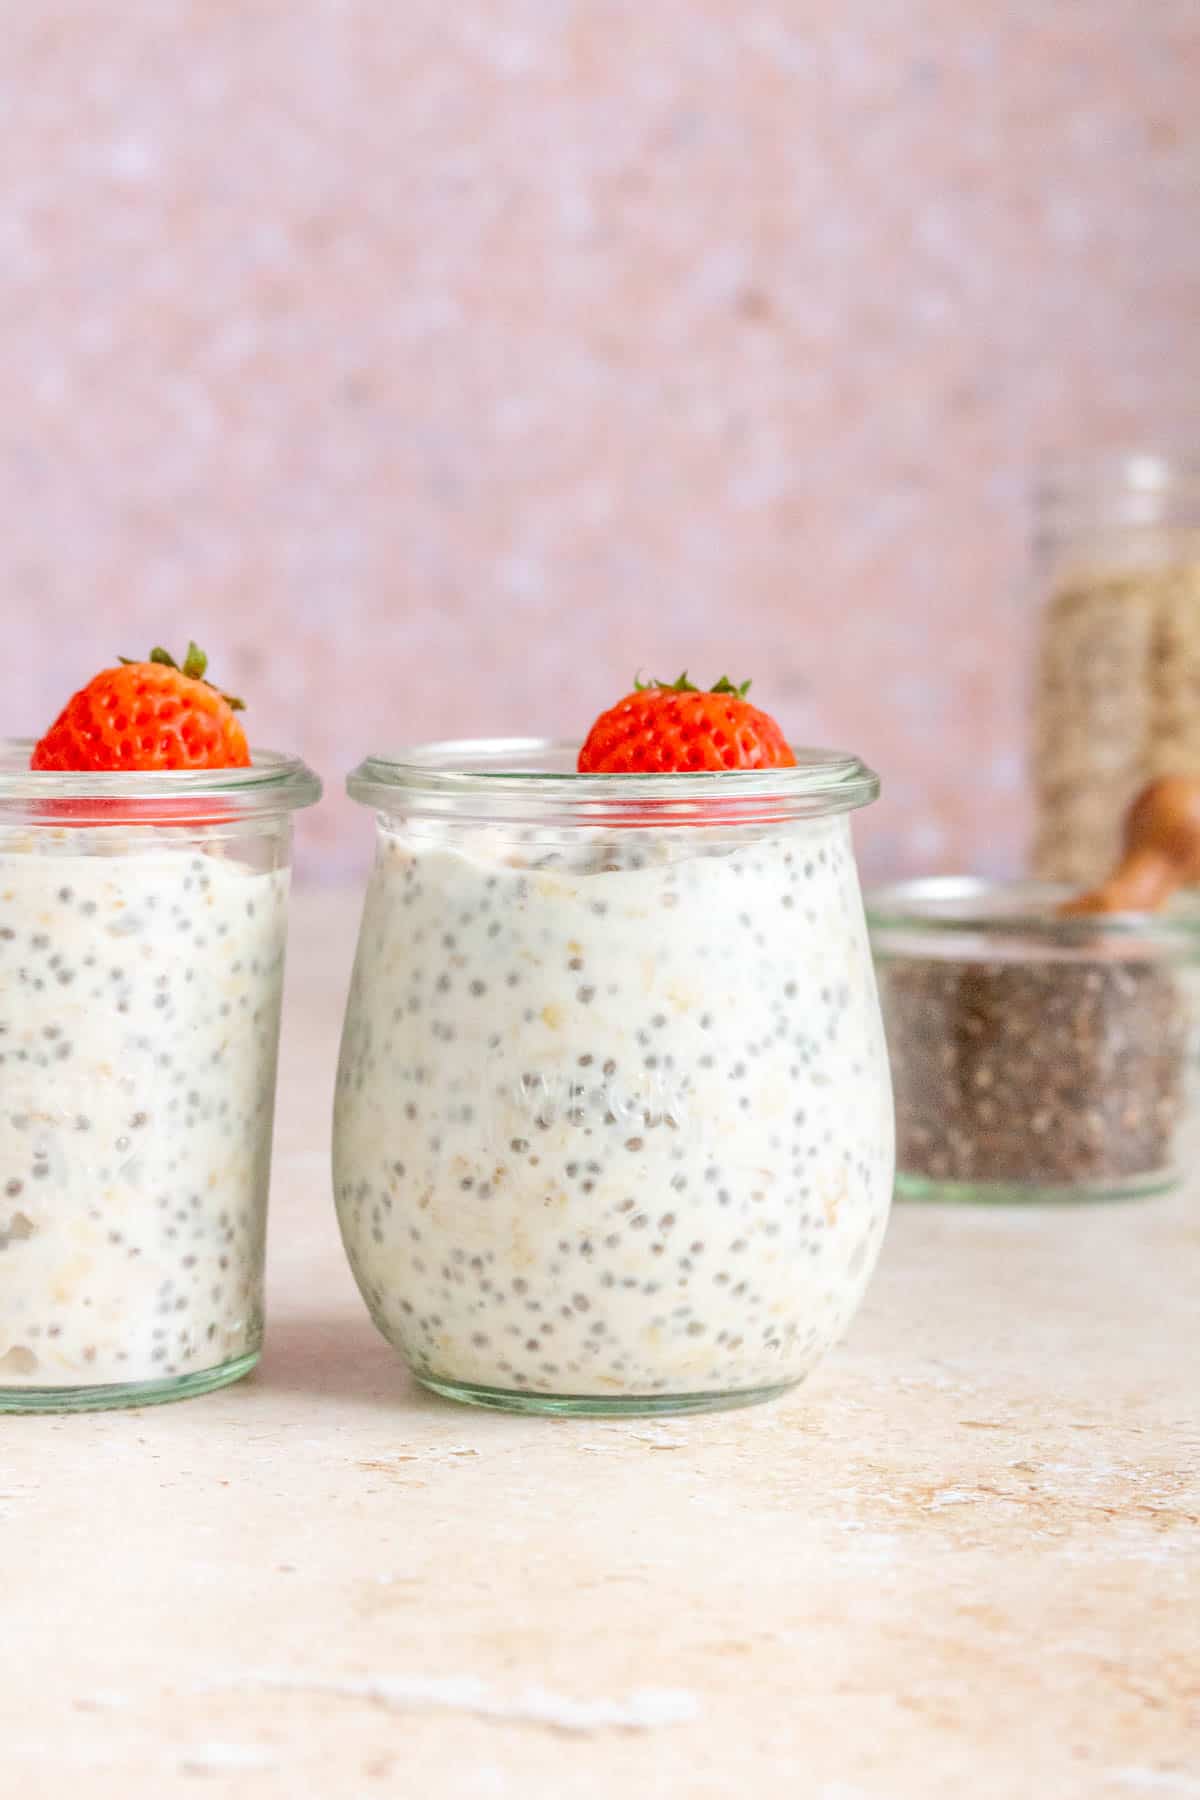 Two jars of kefir overnight oats topped with a mini strawberry.